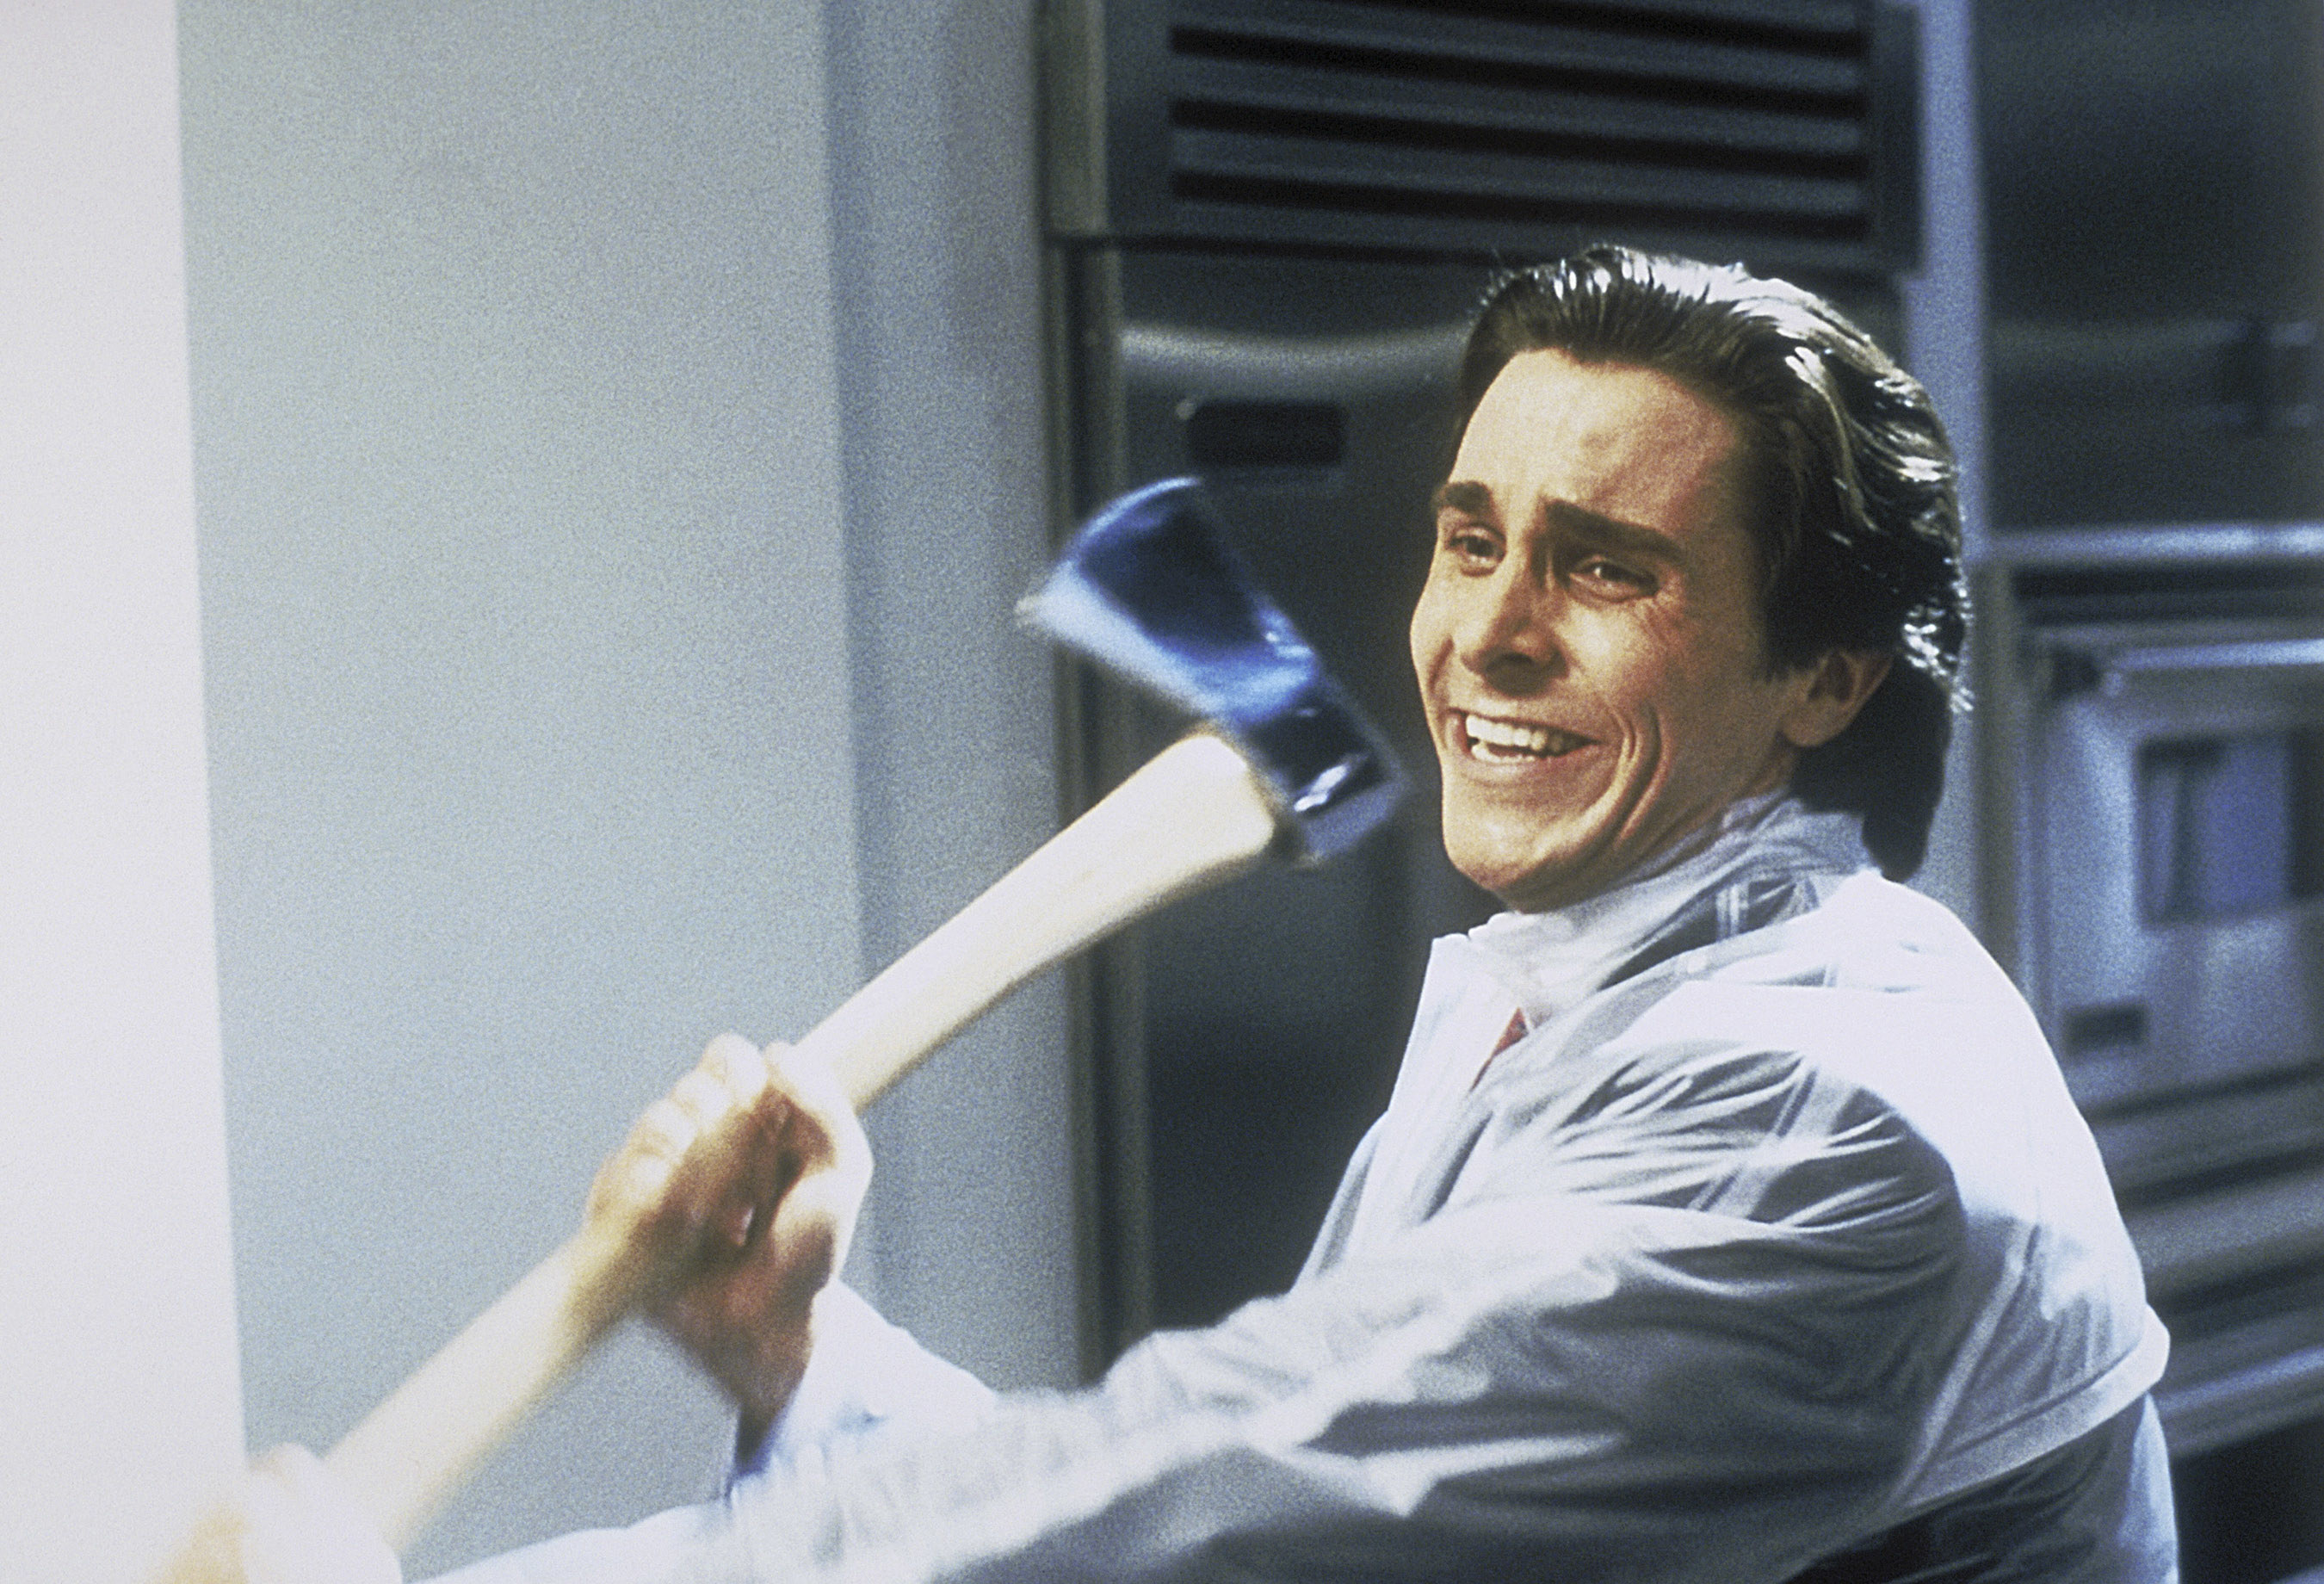 Christian Bale attacks someone with an axe